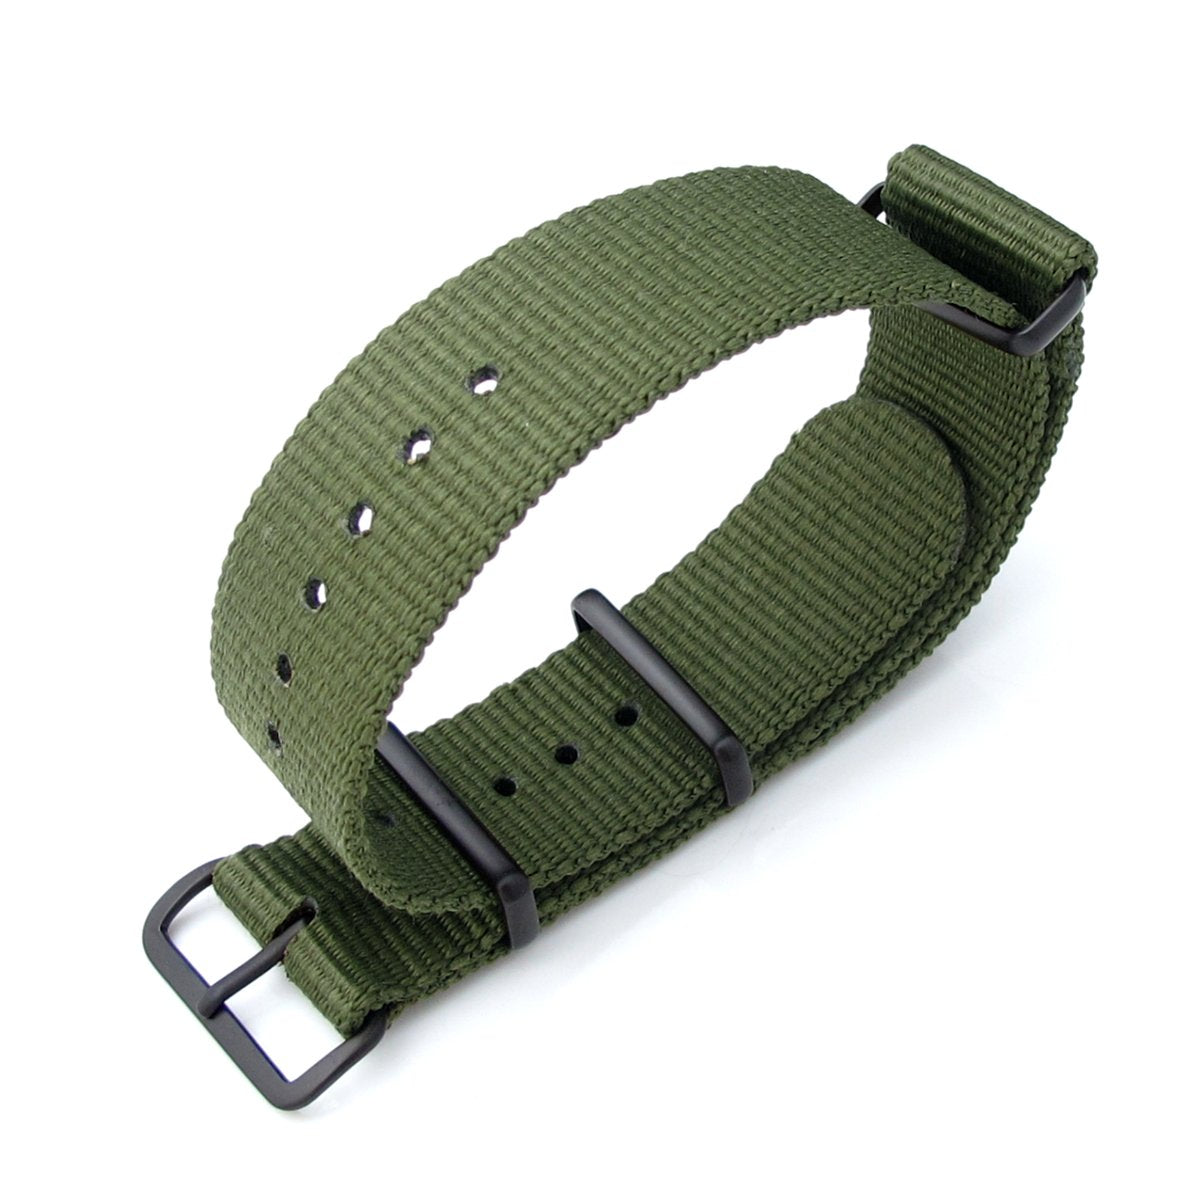 MiLTAT 21mm G10 NATO Military Watch Strap Ballistic Nylon Armband PVD Black Forest Green Strapcode Watch Bands